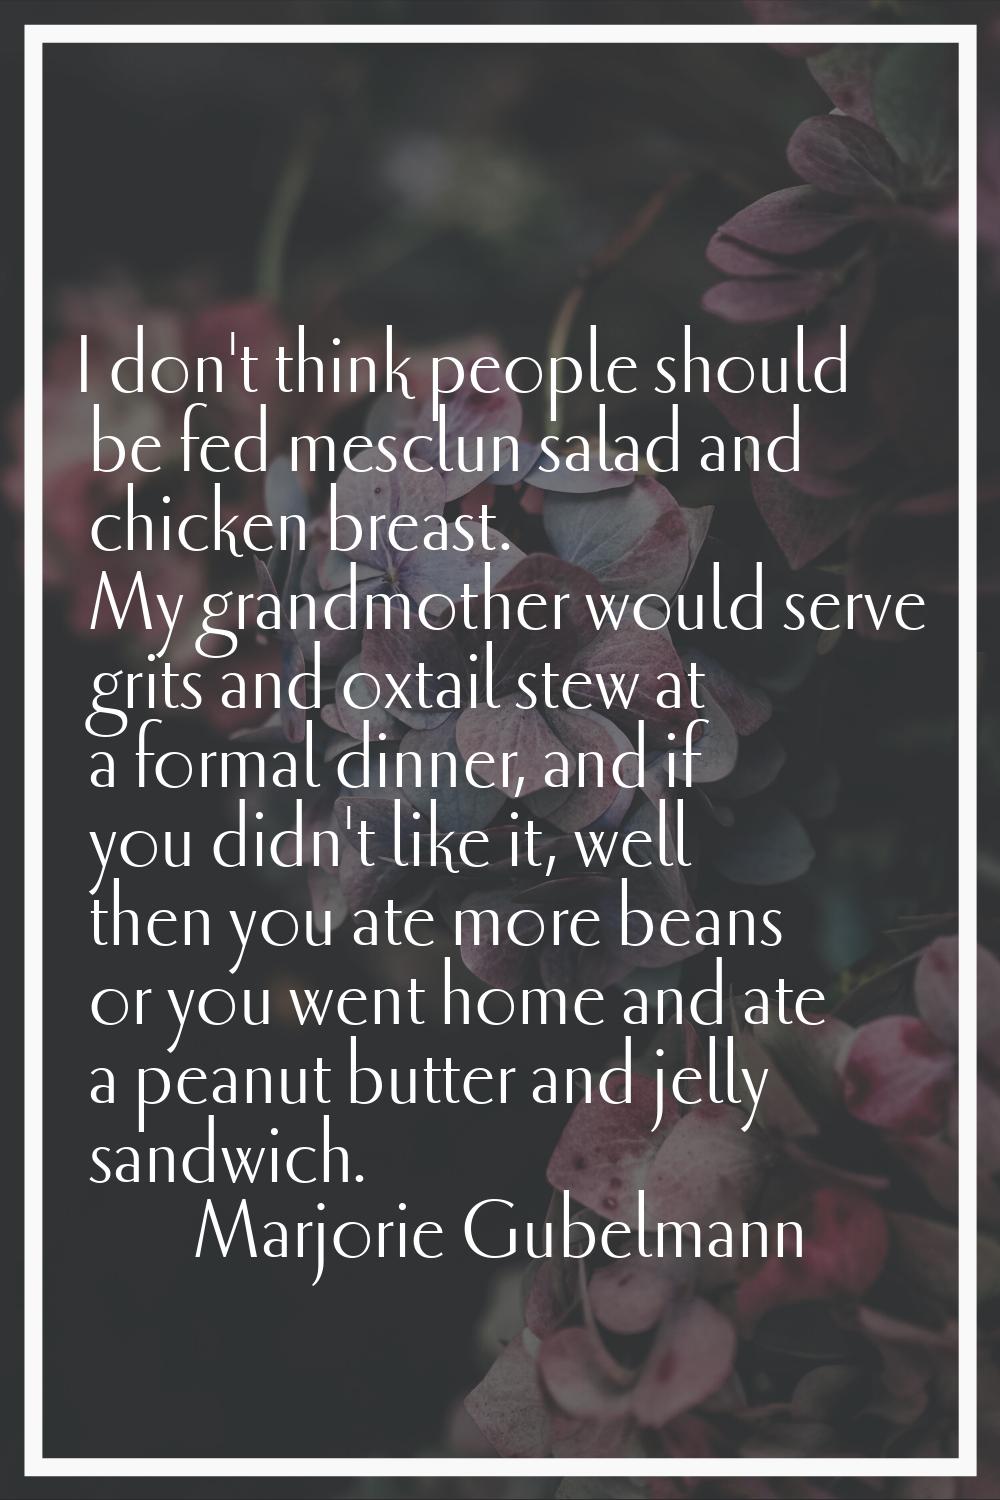 I don't think people should be fed mesclun salad and chicken breast. My grandmother would serve gri